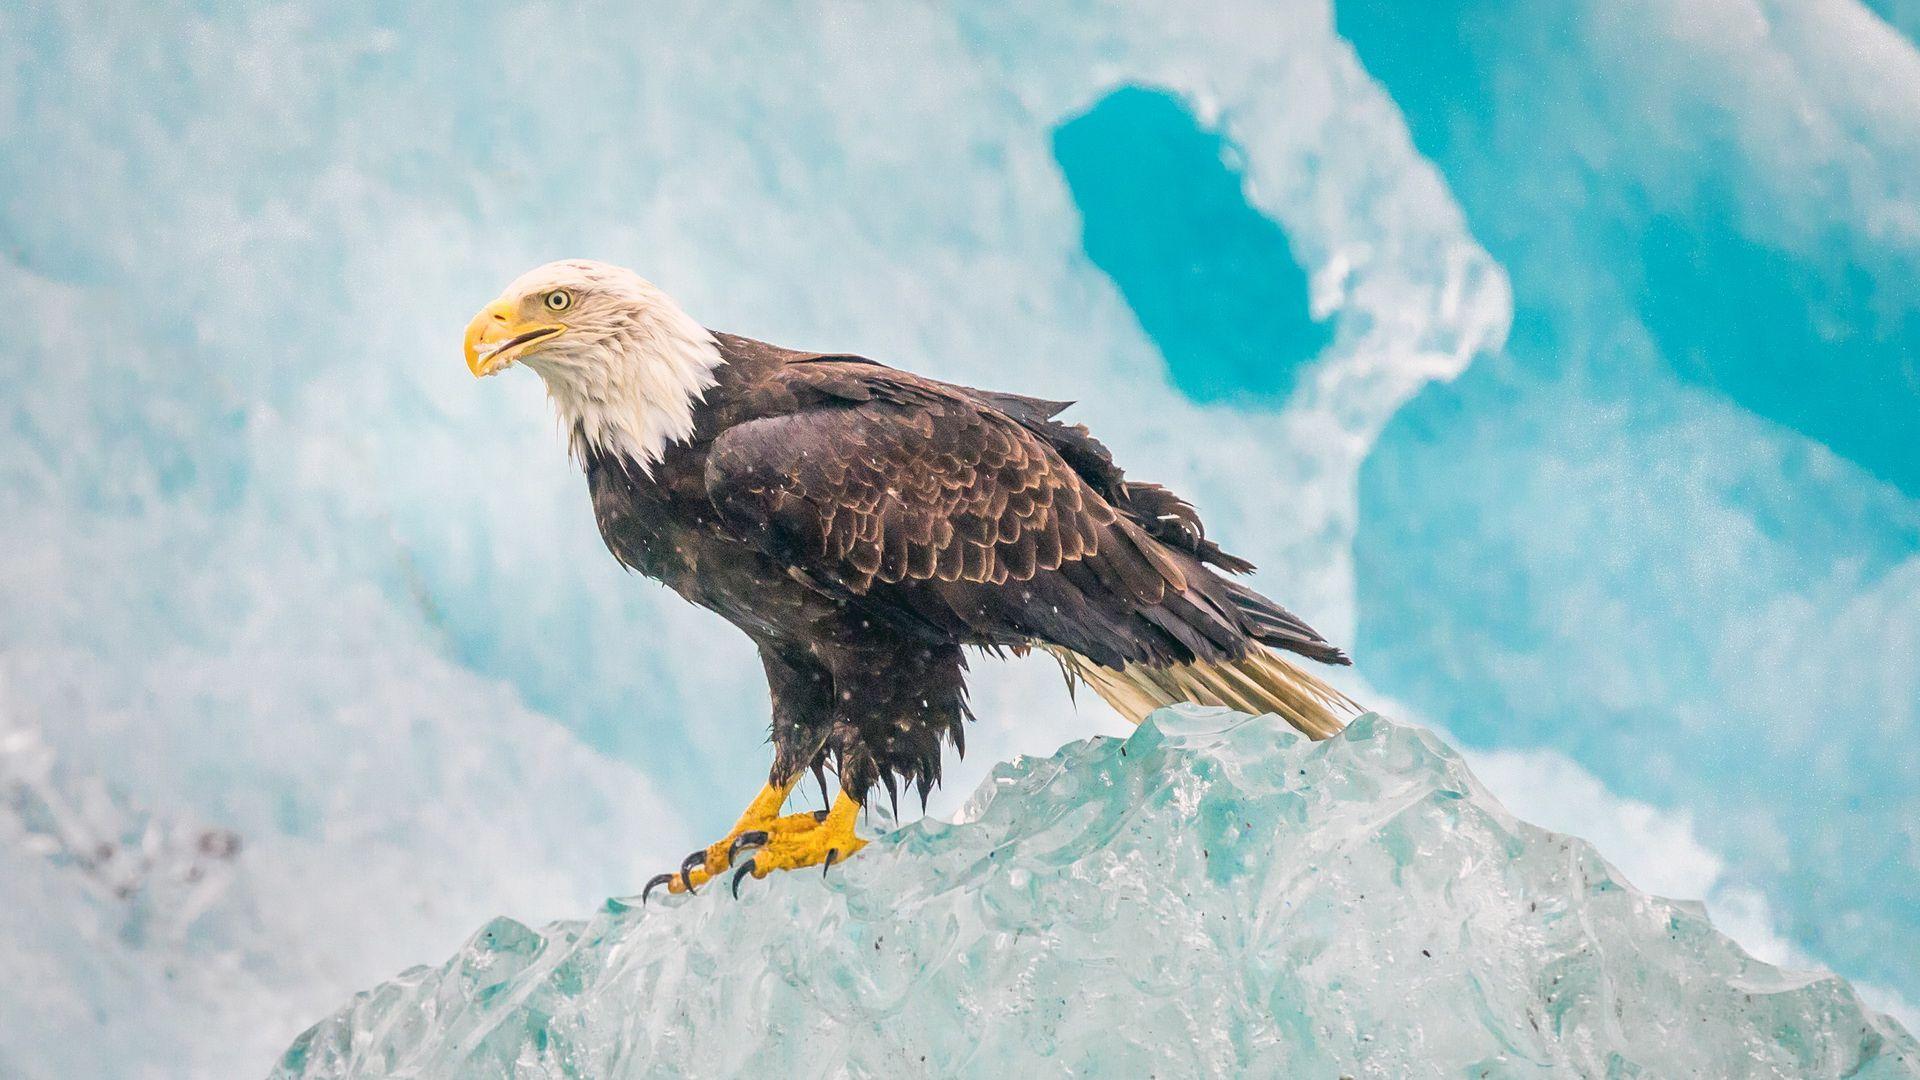 Hd Bald Eagle On The Ice Wallpaper - Eagle On Ice - HD Wallpaper 